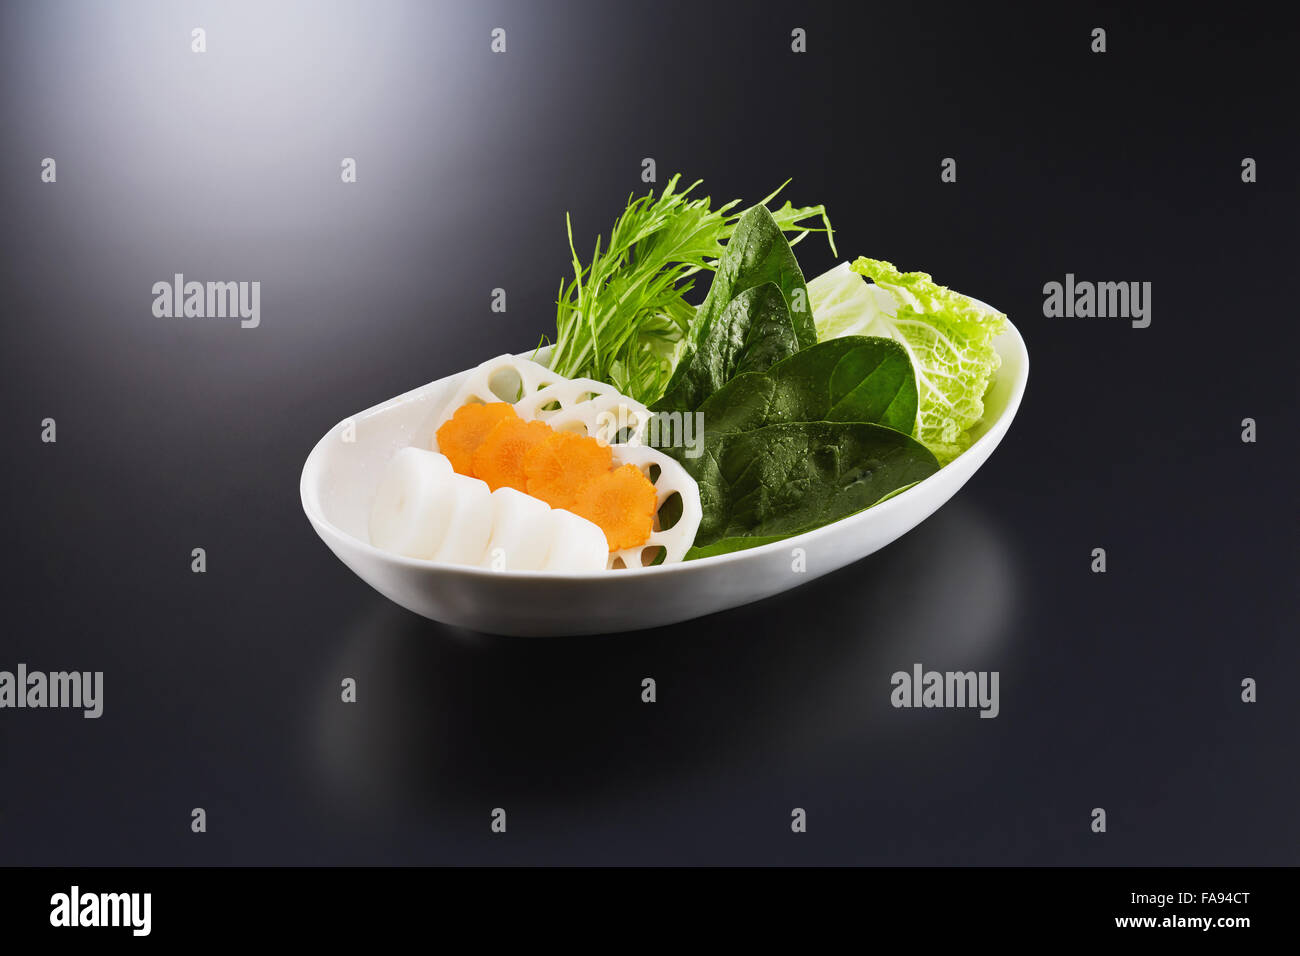 Assorted vegetables Stock Photo